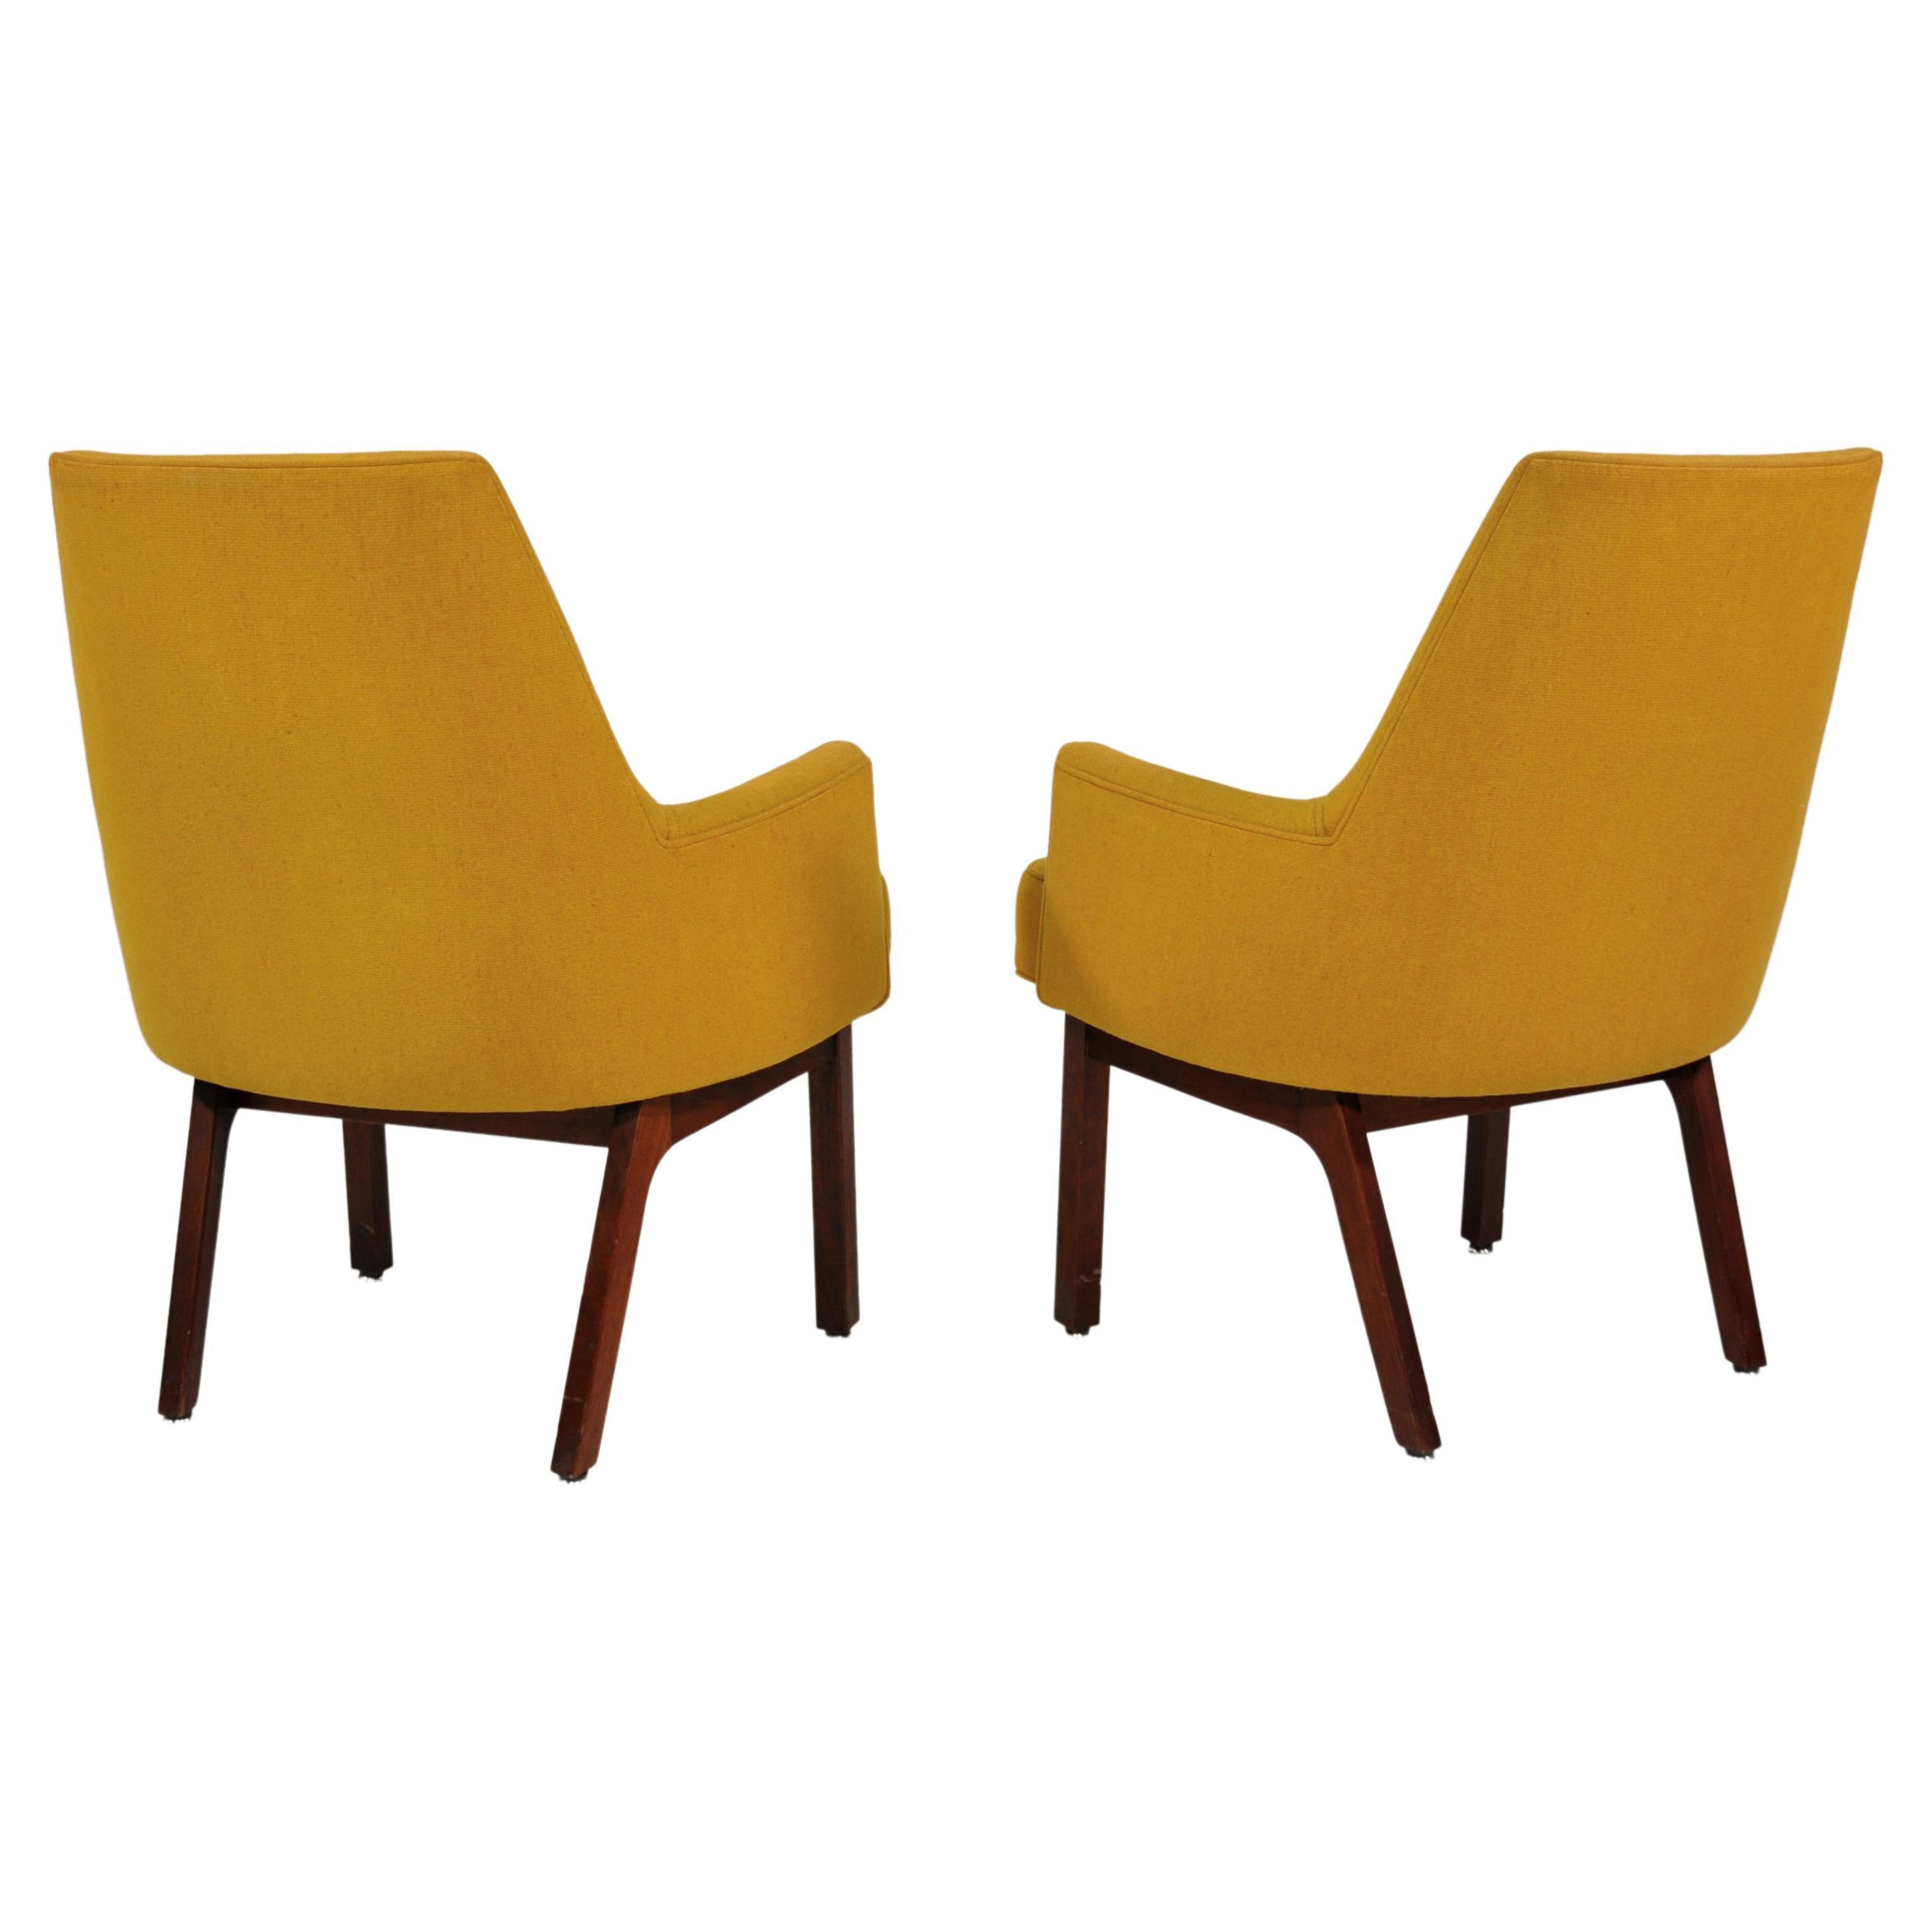 Mid-20th Century Yellow Wool Walnut Lounge Chairs by Vista of California, a Pair For Sale